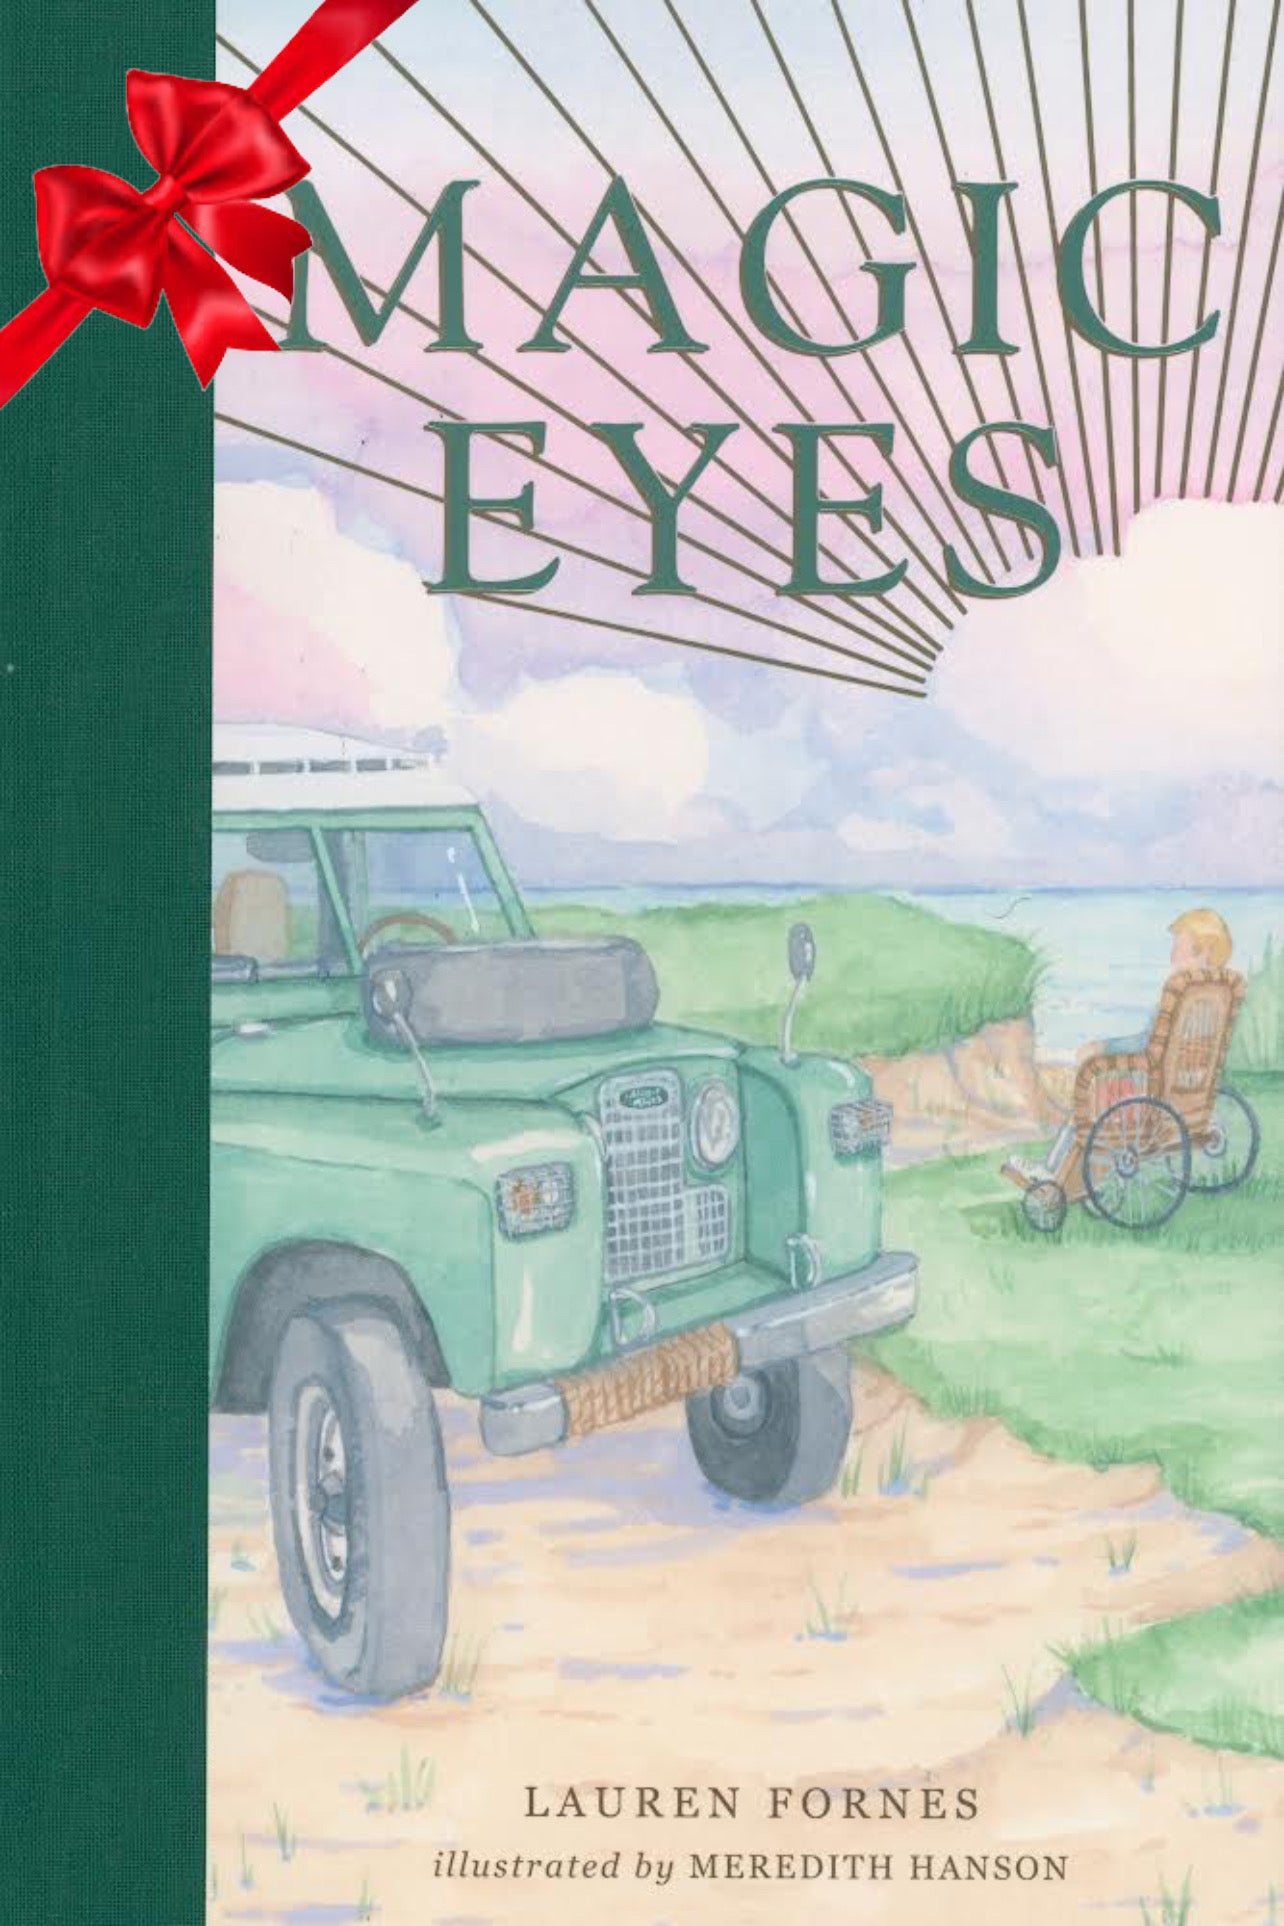 Image of the cover of Magic Eyes, a children's book about a blind boy on Nantucket. The cover art includes a boy in a wheelchair and a vintage Land Rover on a small cliff overlooking the Atlantic Ocean. The cover includes the names of author (Lauren Fornes) and illustrator (Meredith Hanson). This image also includes a red bow in the upper left corner, as this product is a donation to local school libraries.